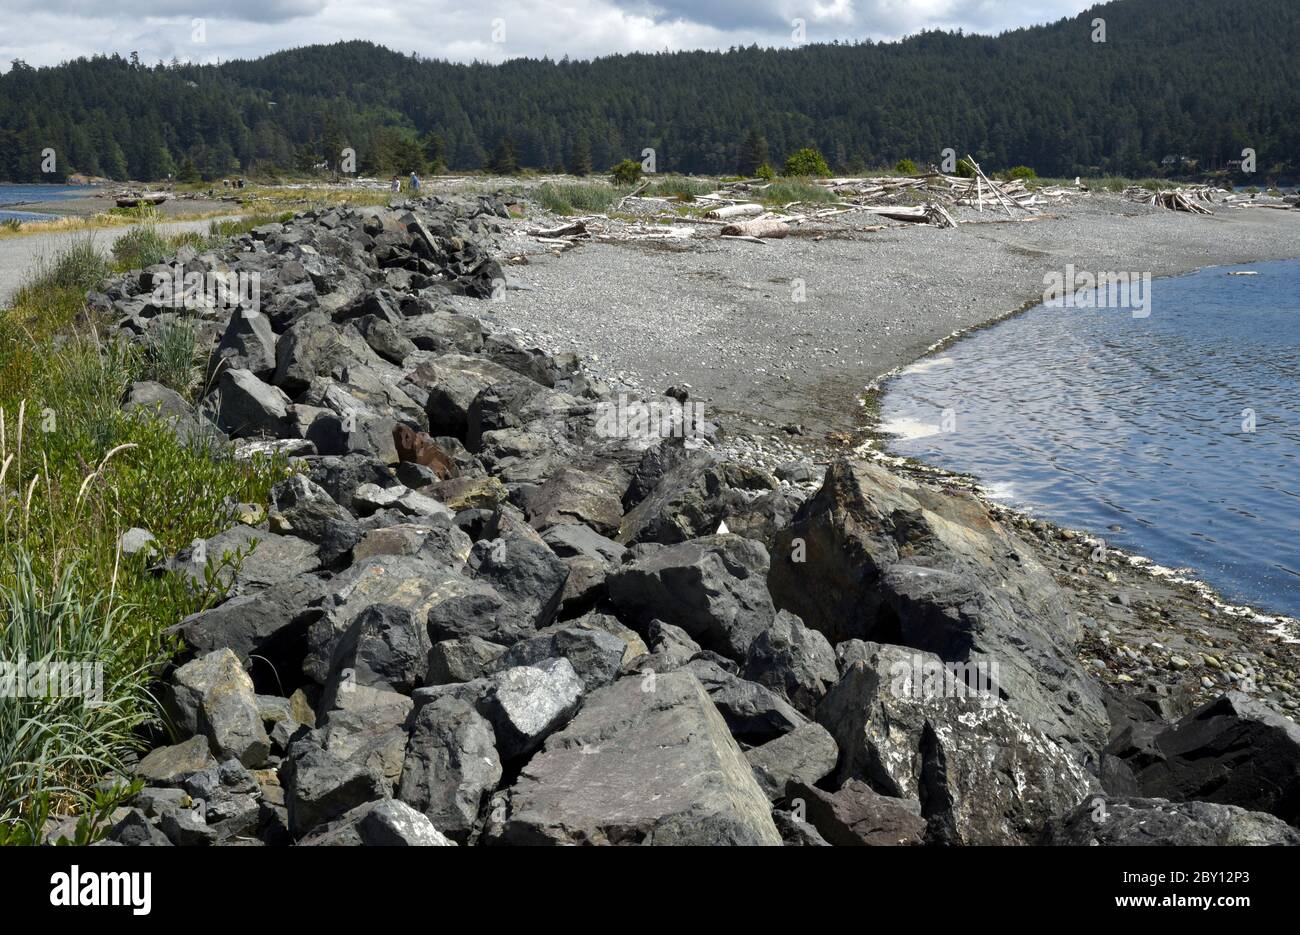 Riprap runs along the ocean side of Whiffin Spit in Sooke, British Columbia, Canada on Vancouver Island. Riprap is rock or other material placed along Stock Photo